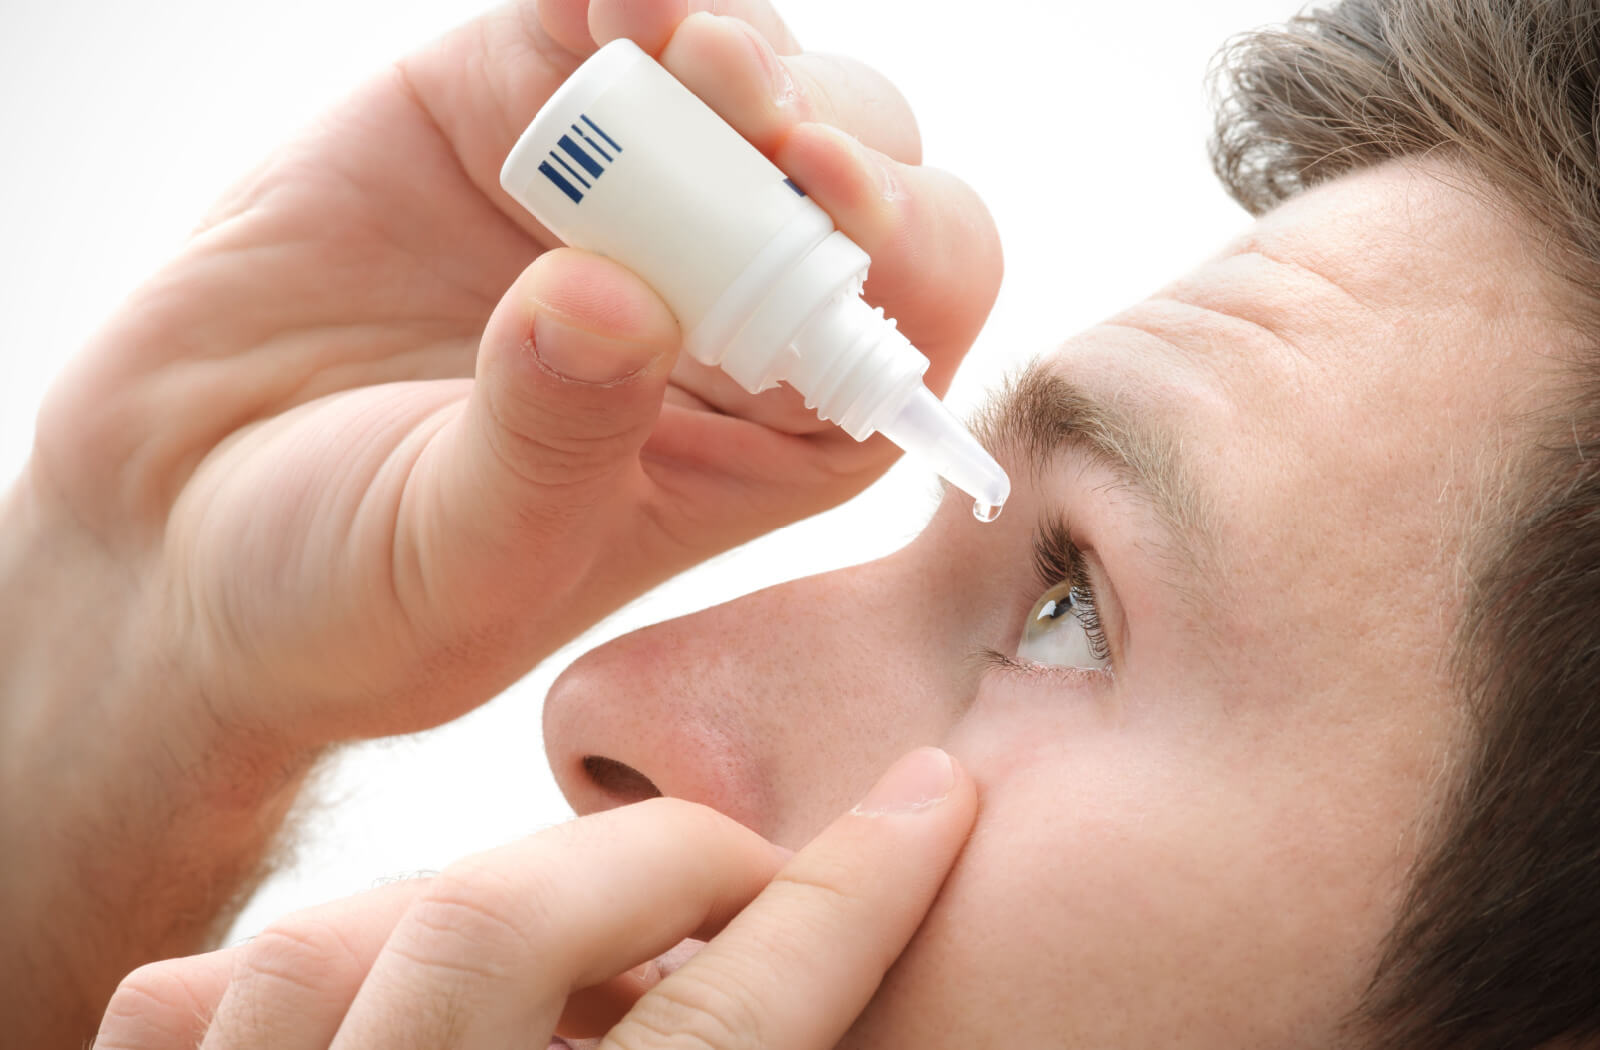 A close-up of a young person applying eyedrops to his left eye.